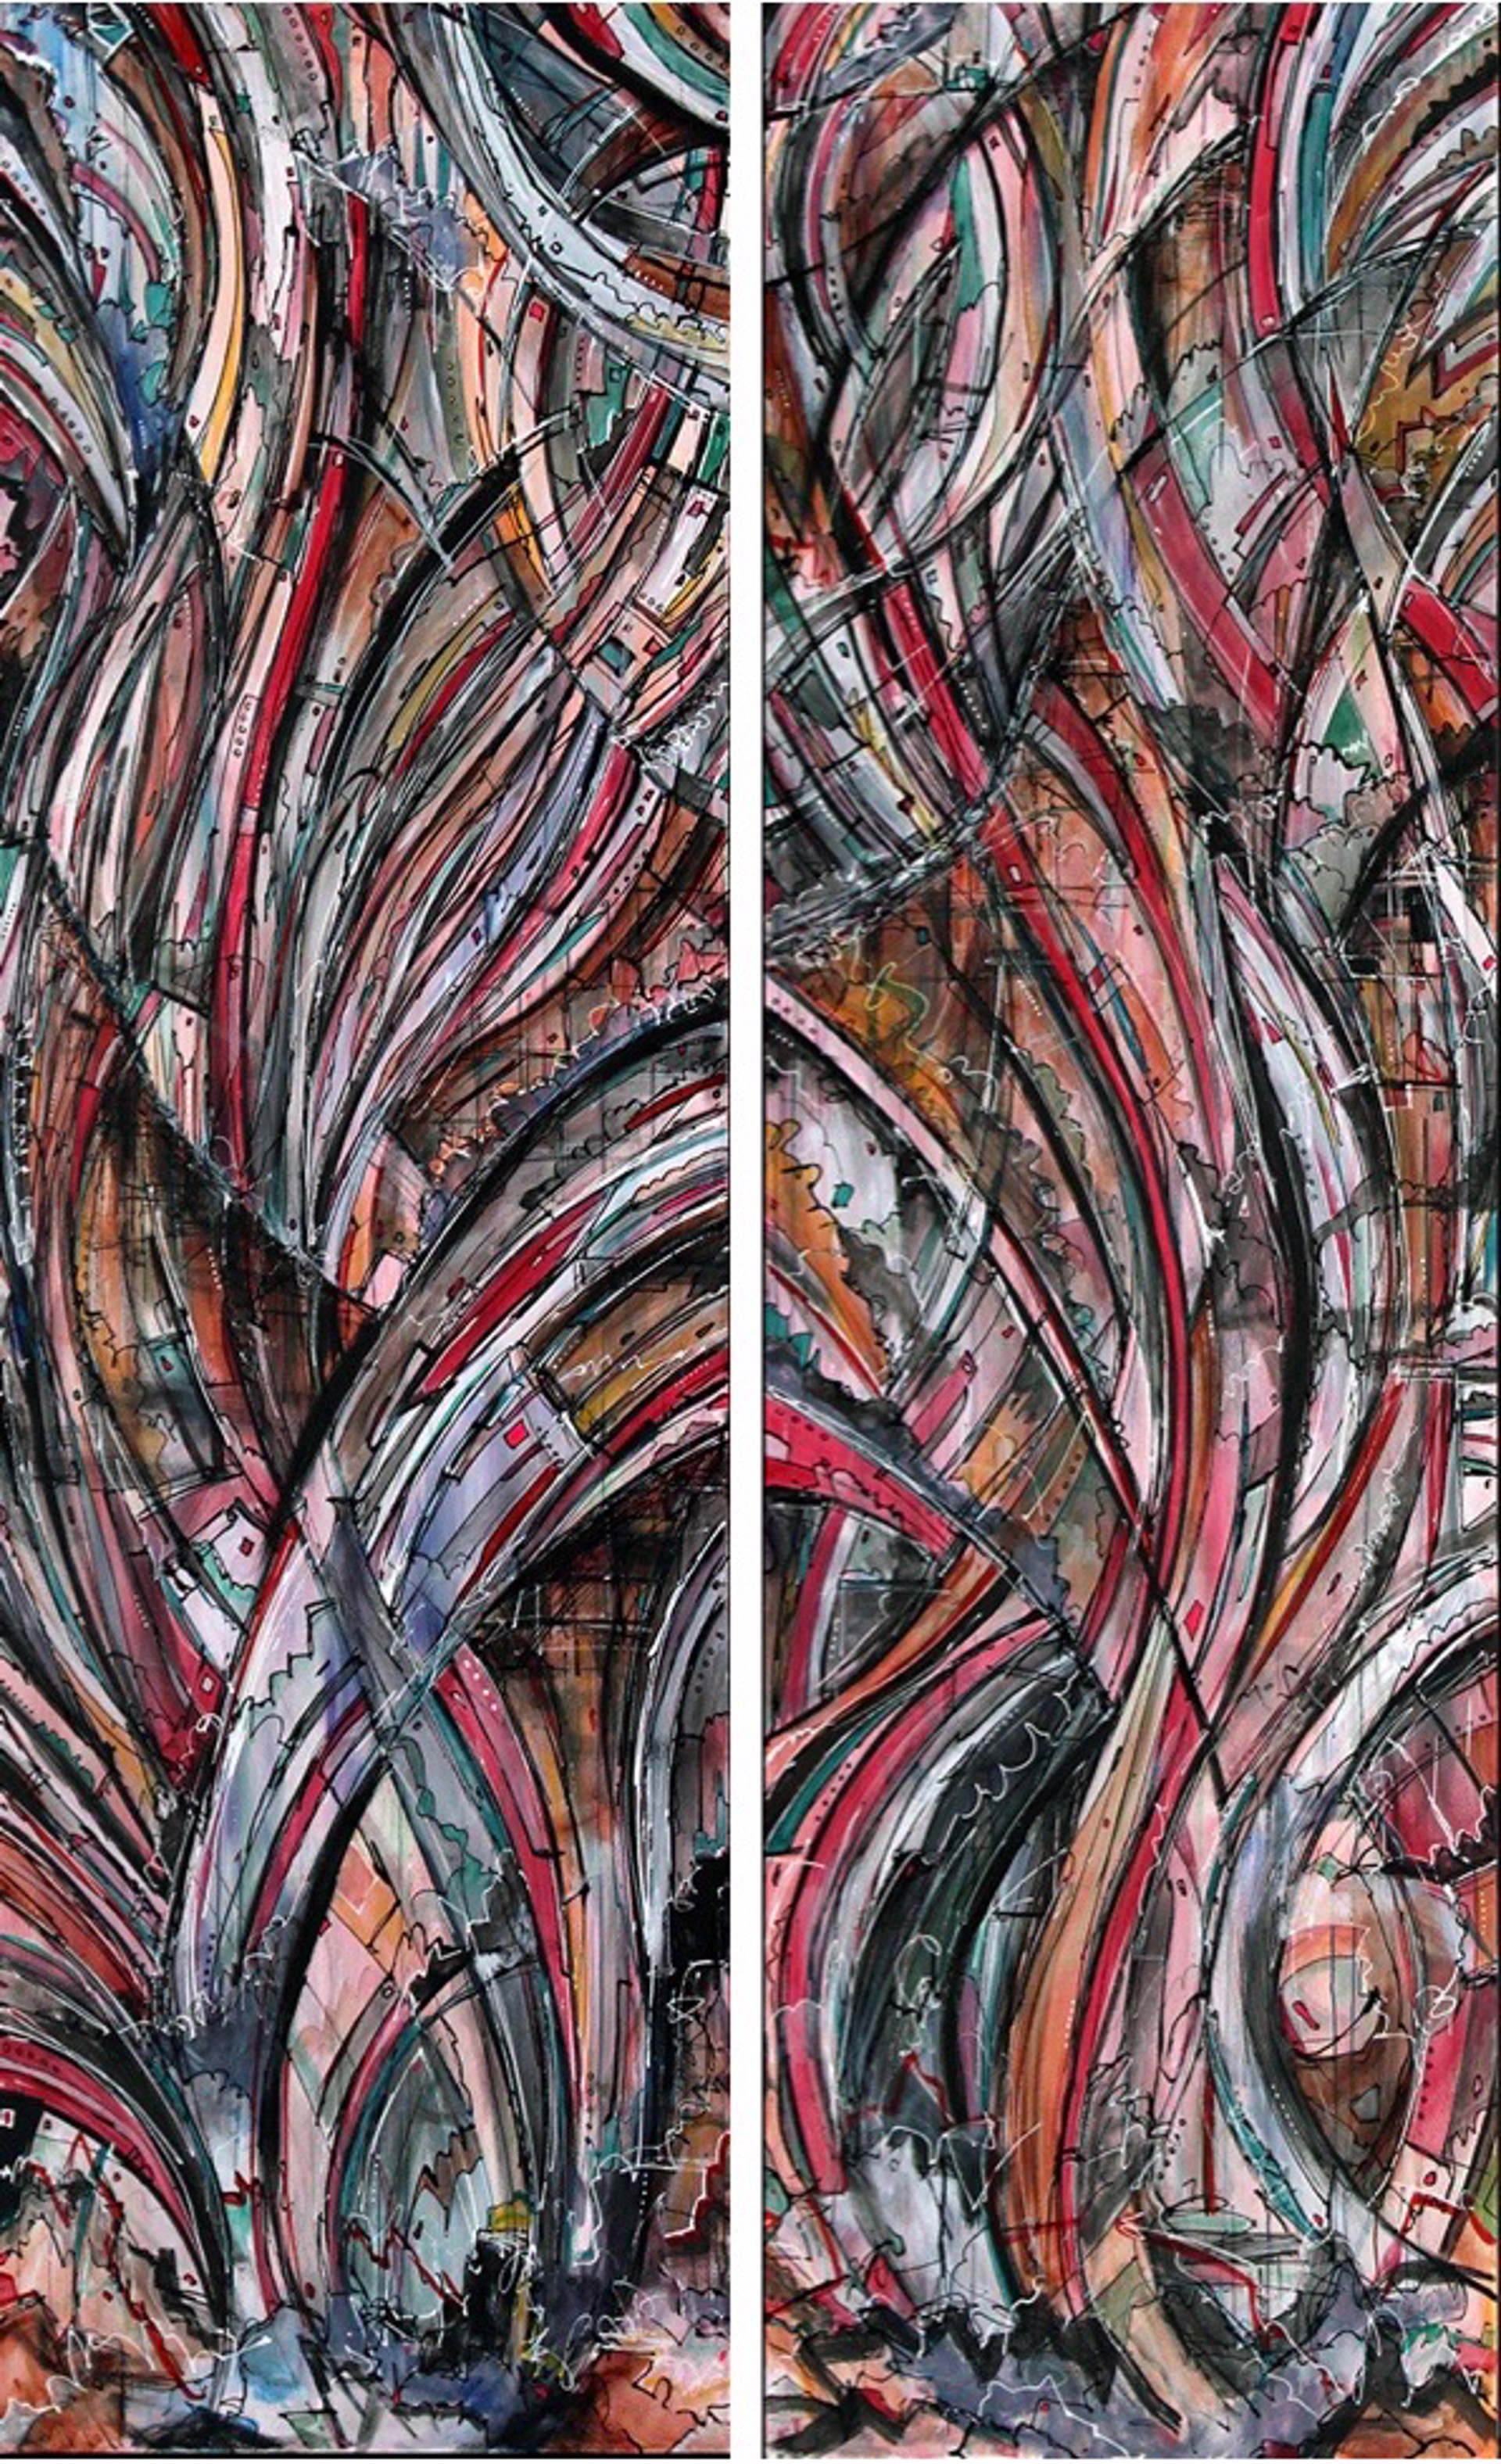 Release (diptych) by Henry Riekena